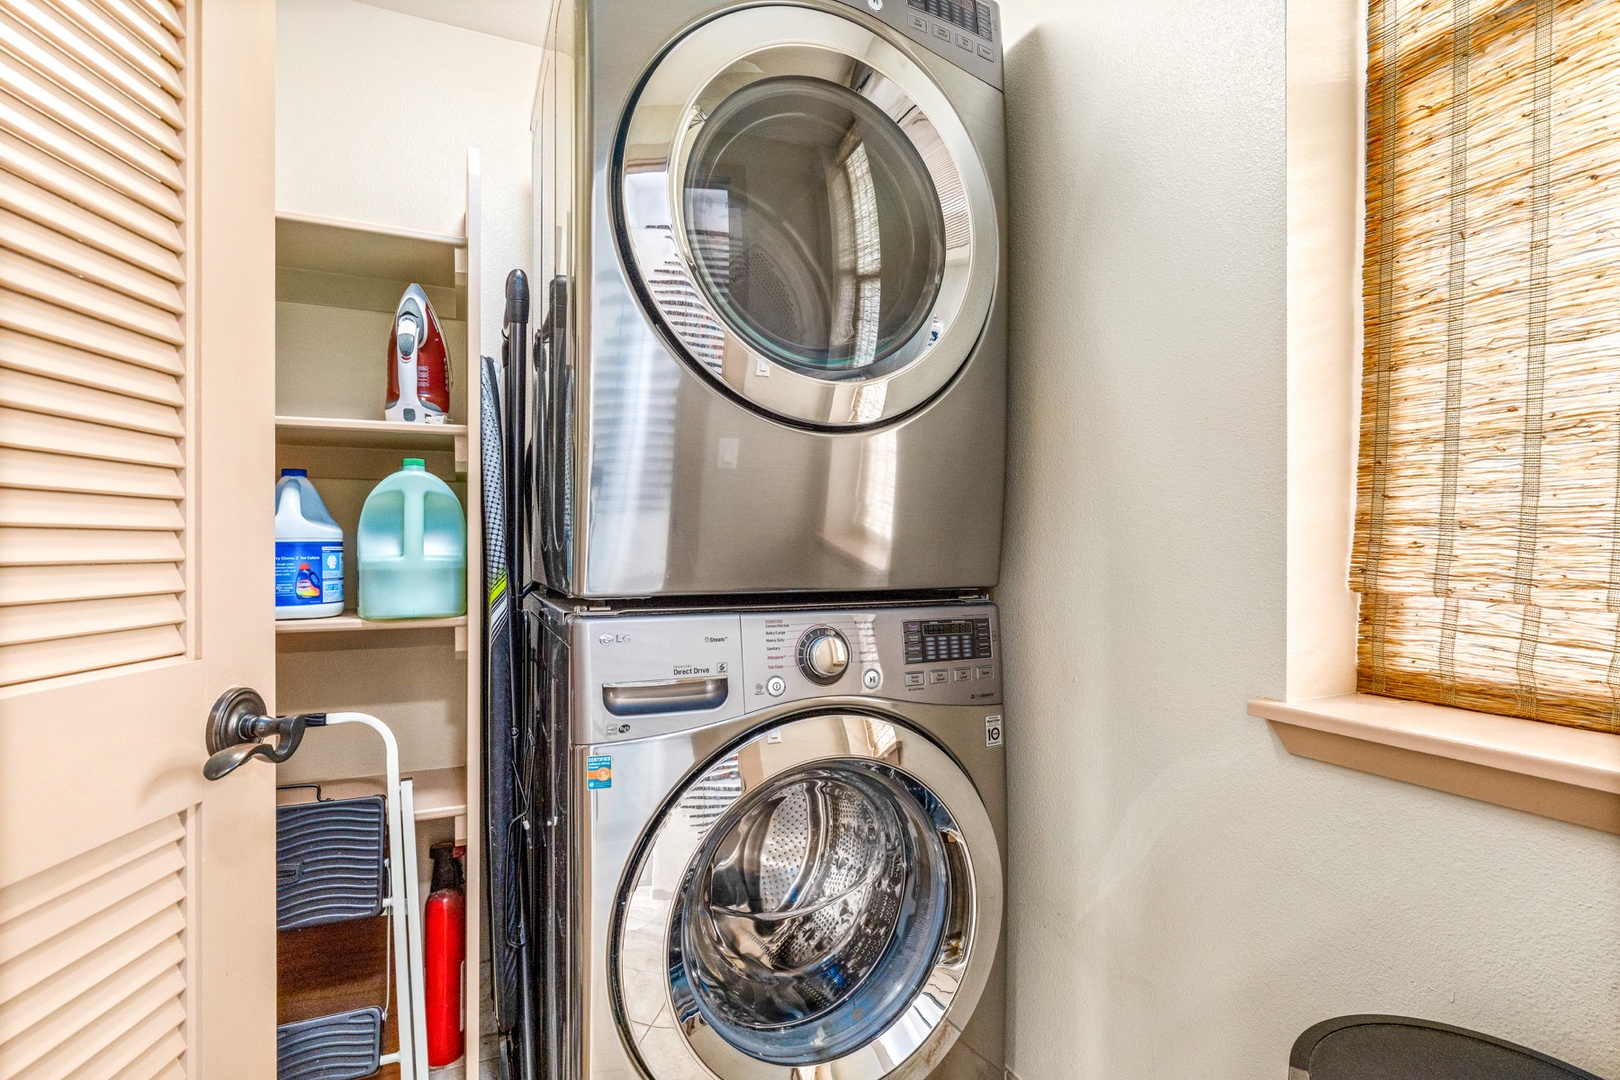 Waikoloa Vacation Rentals, 2BD Hali'i Kai 12C at Waikoloa Resort - Dedicated laundry room with oversized washer and dryer and supplied detergent.